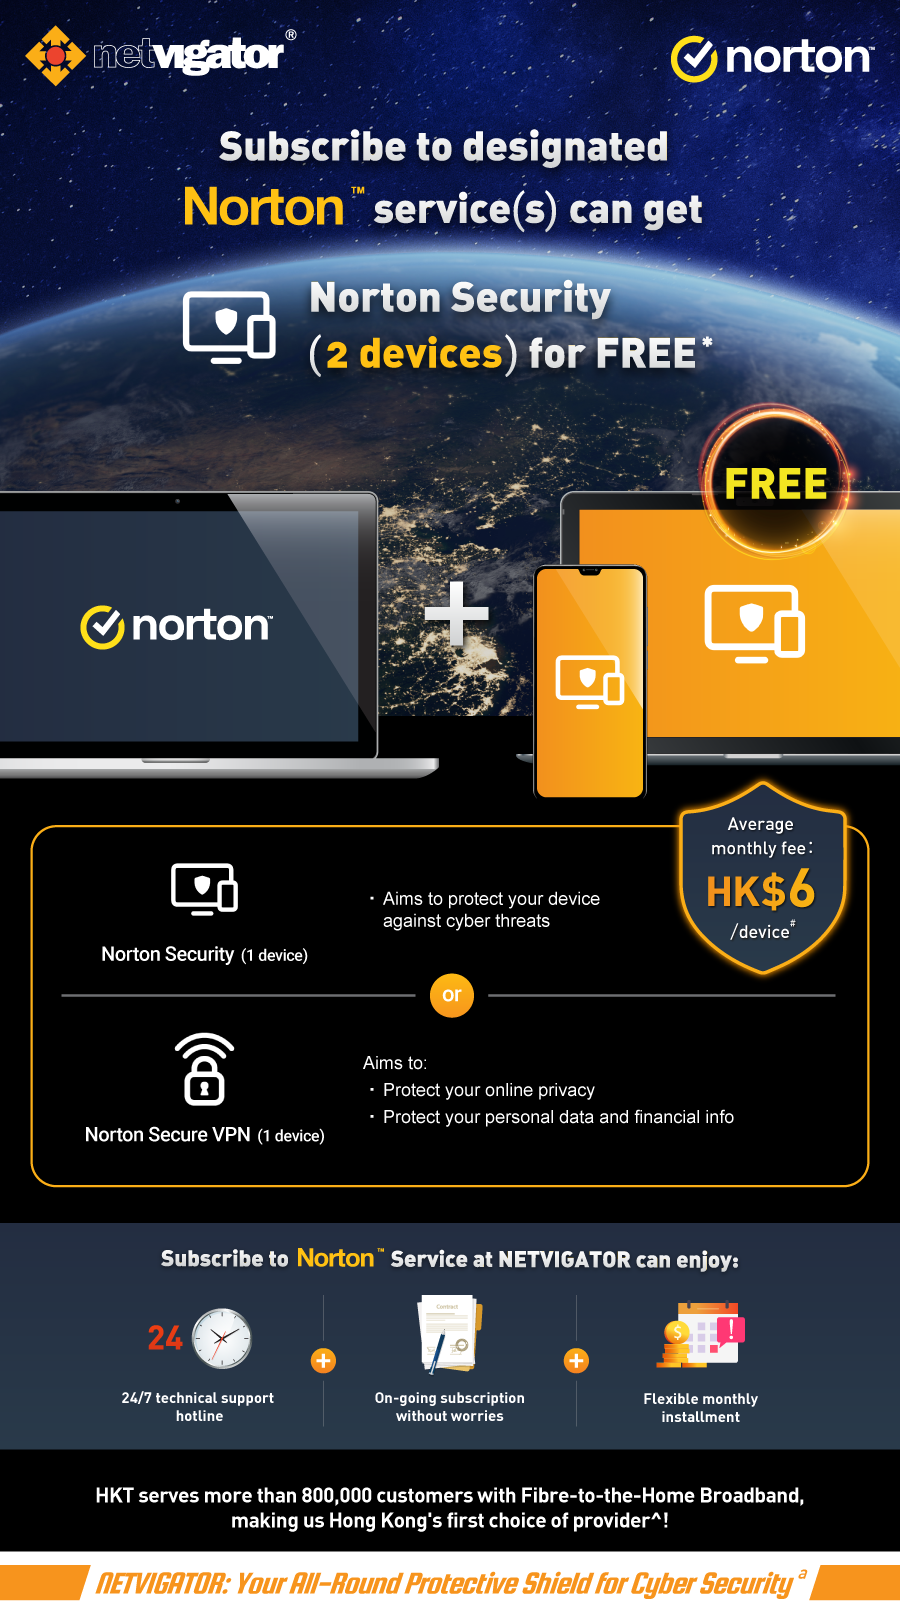 Limited Time Offer 'Norton 1+2'